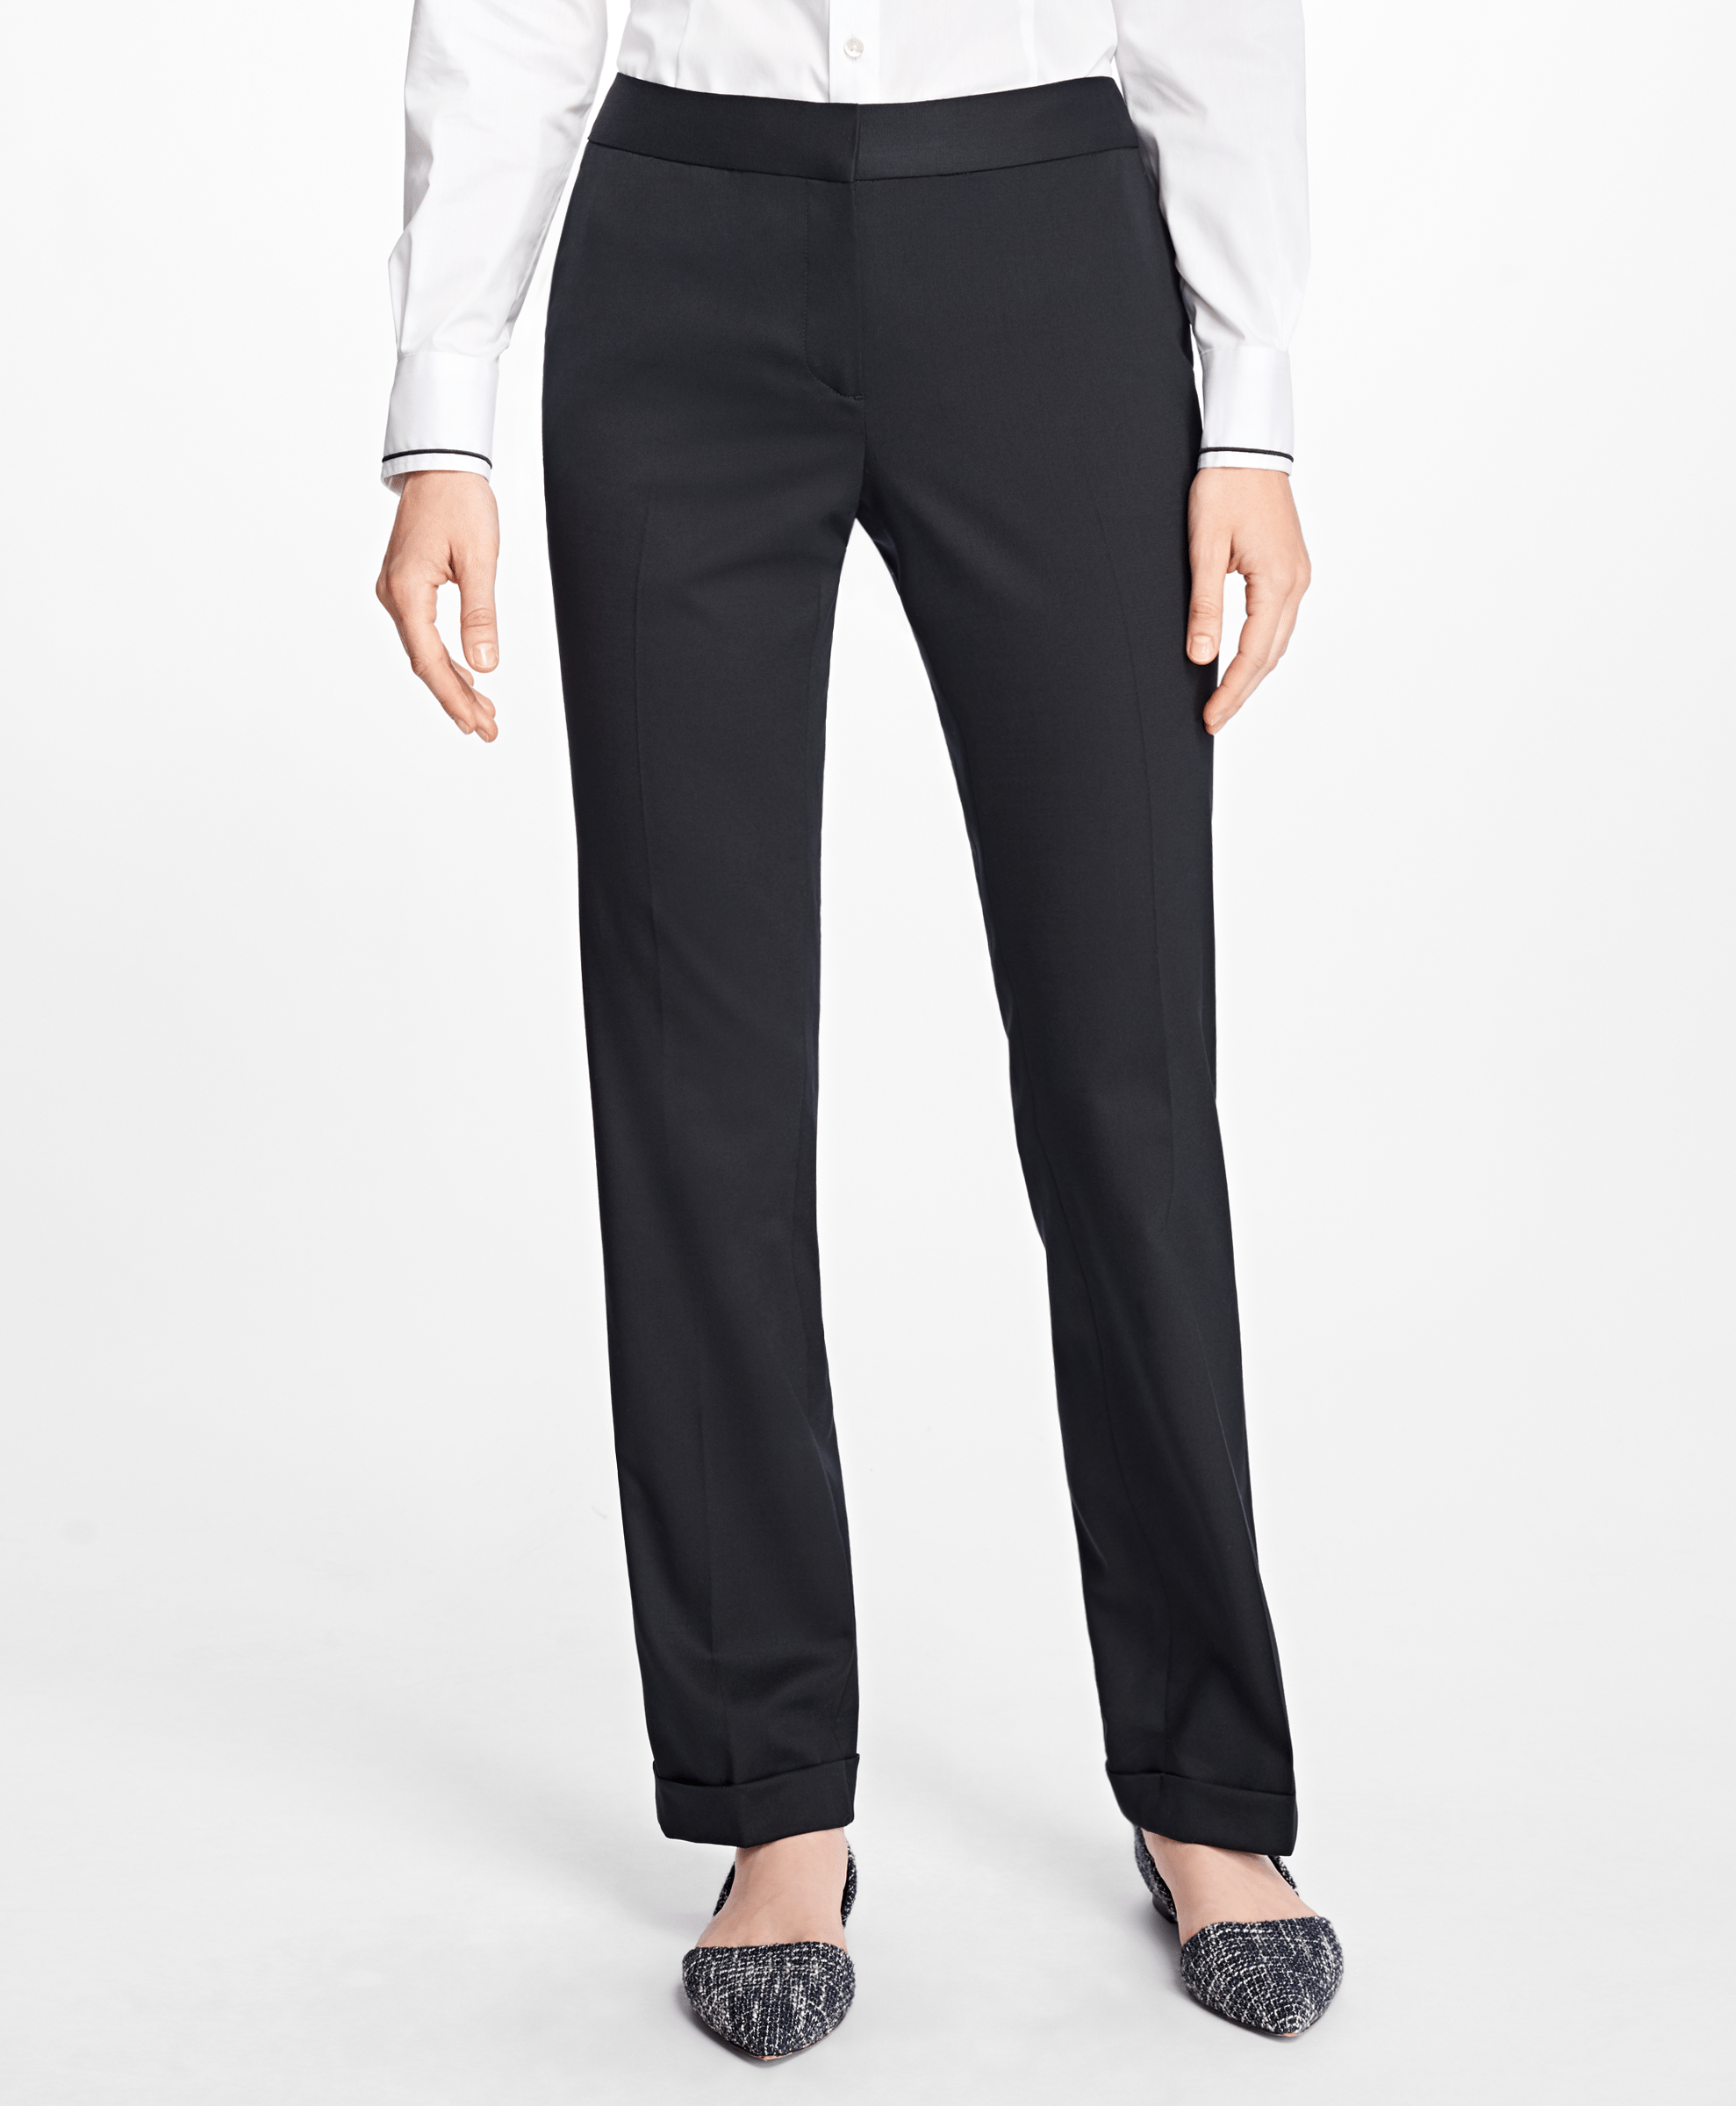 Brooks Brothers Pnt Wl Suiting Black - Womens Dress Trouser